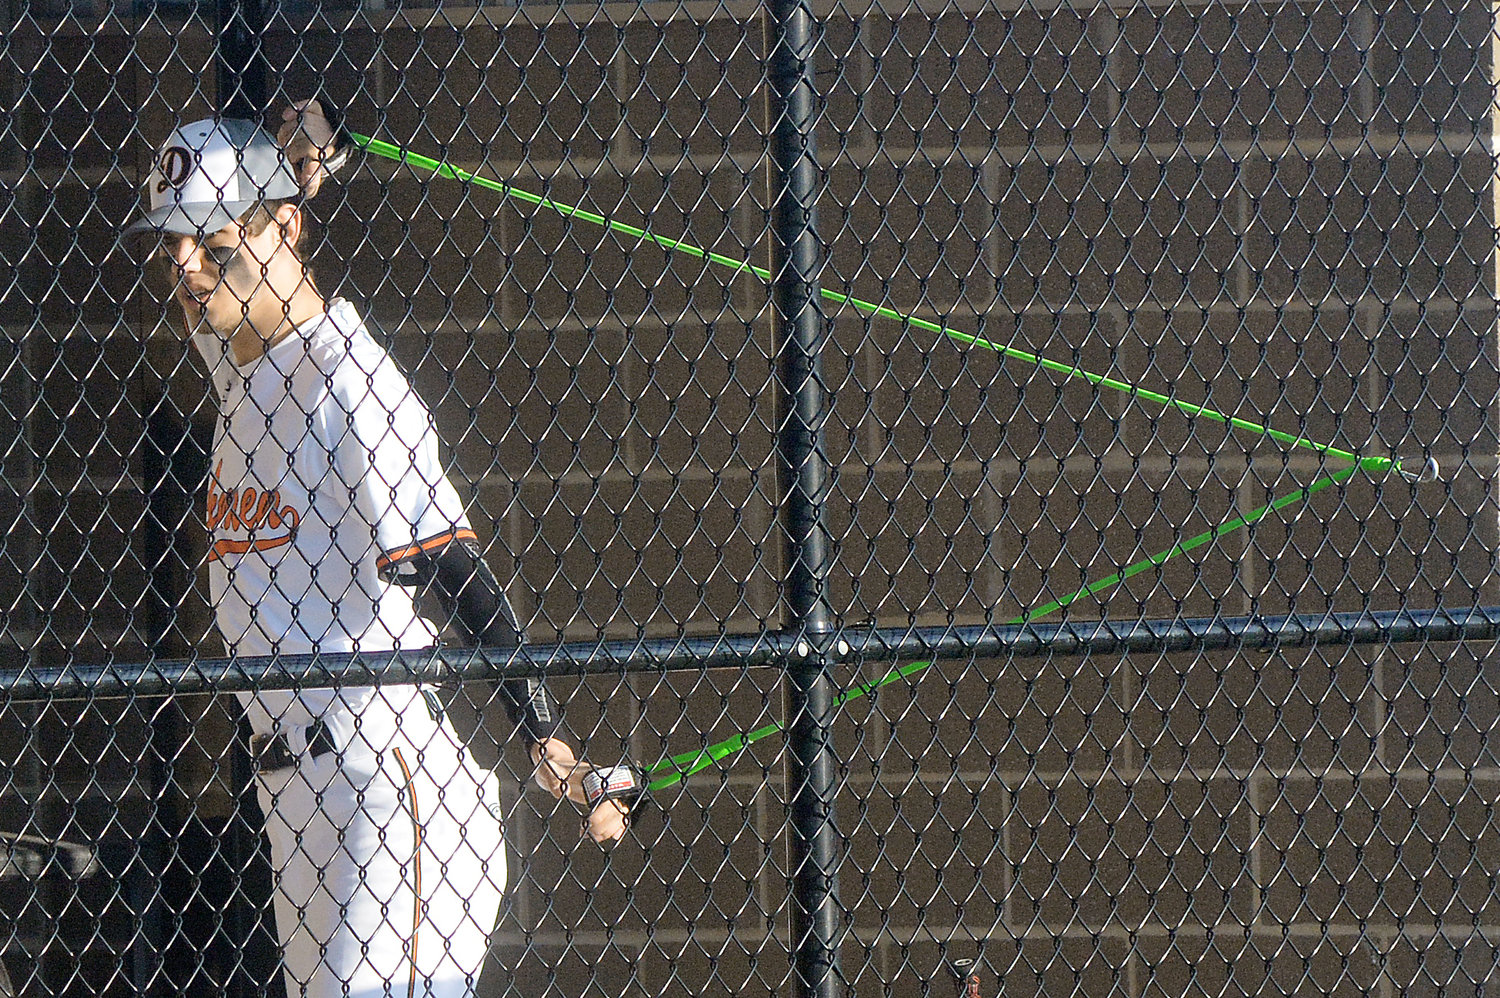 Valley uses elastic bands to stretch his arms before hitting the pitcher’s mound against the Tigers.